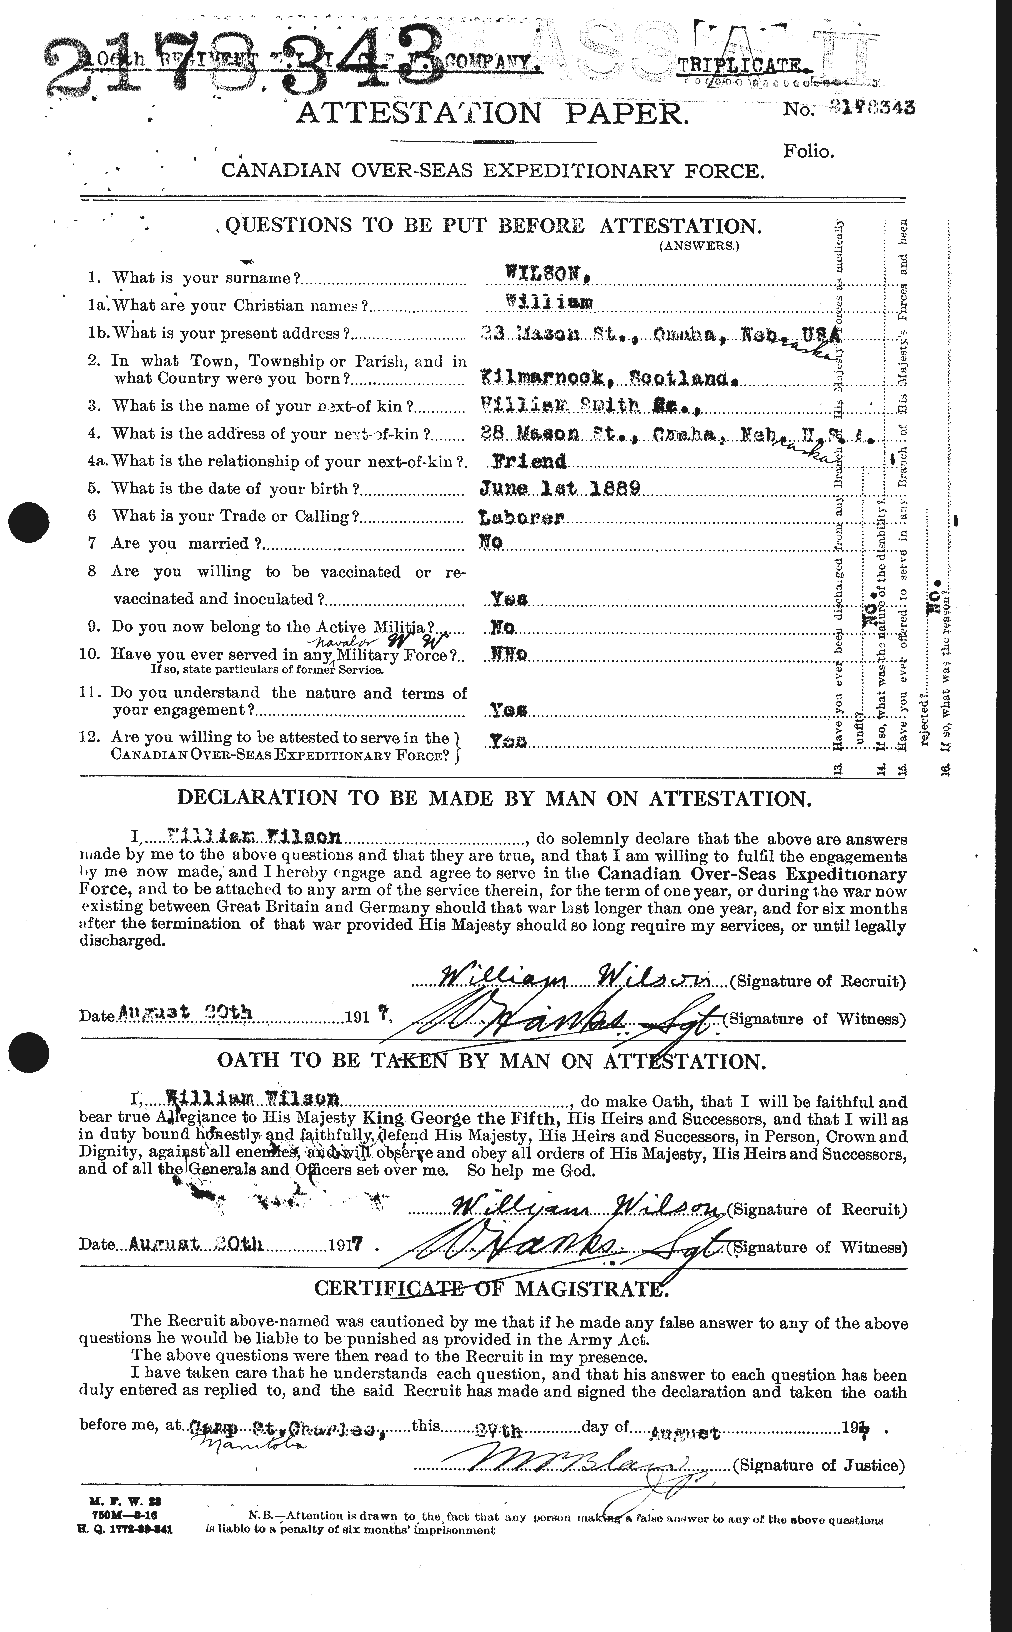 Personnel Records of the First World War - CEF 681828a